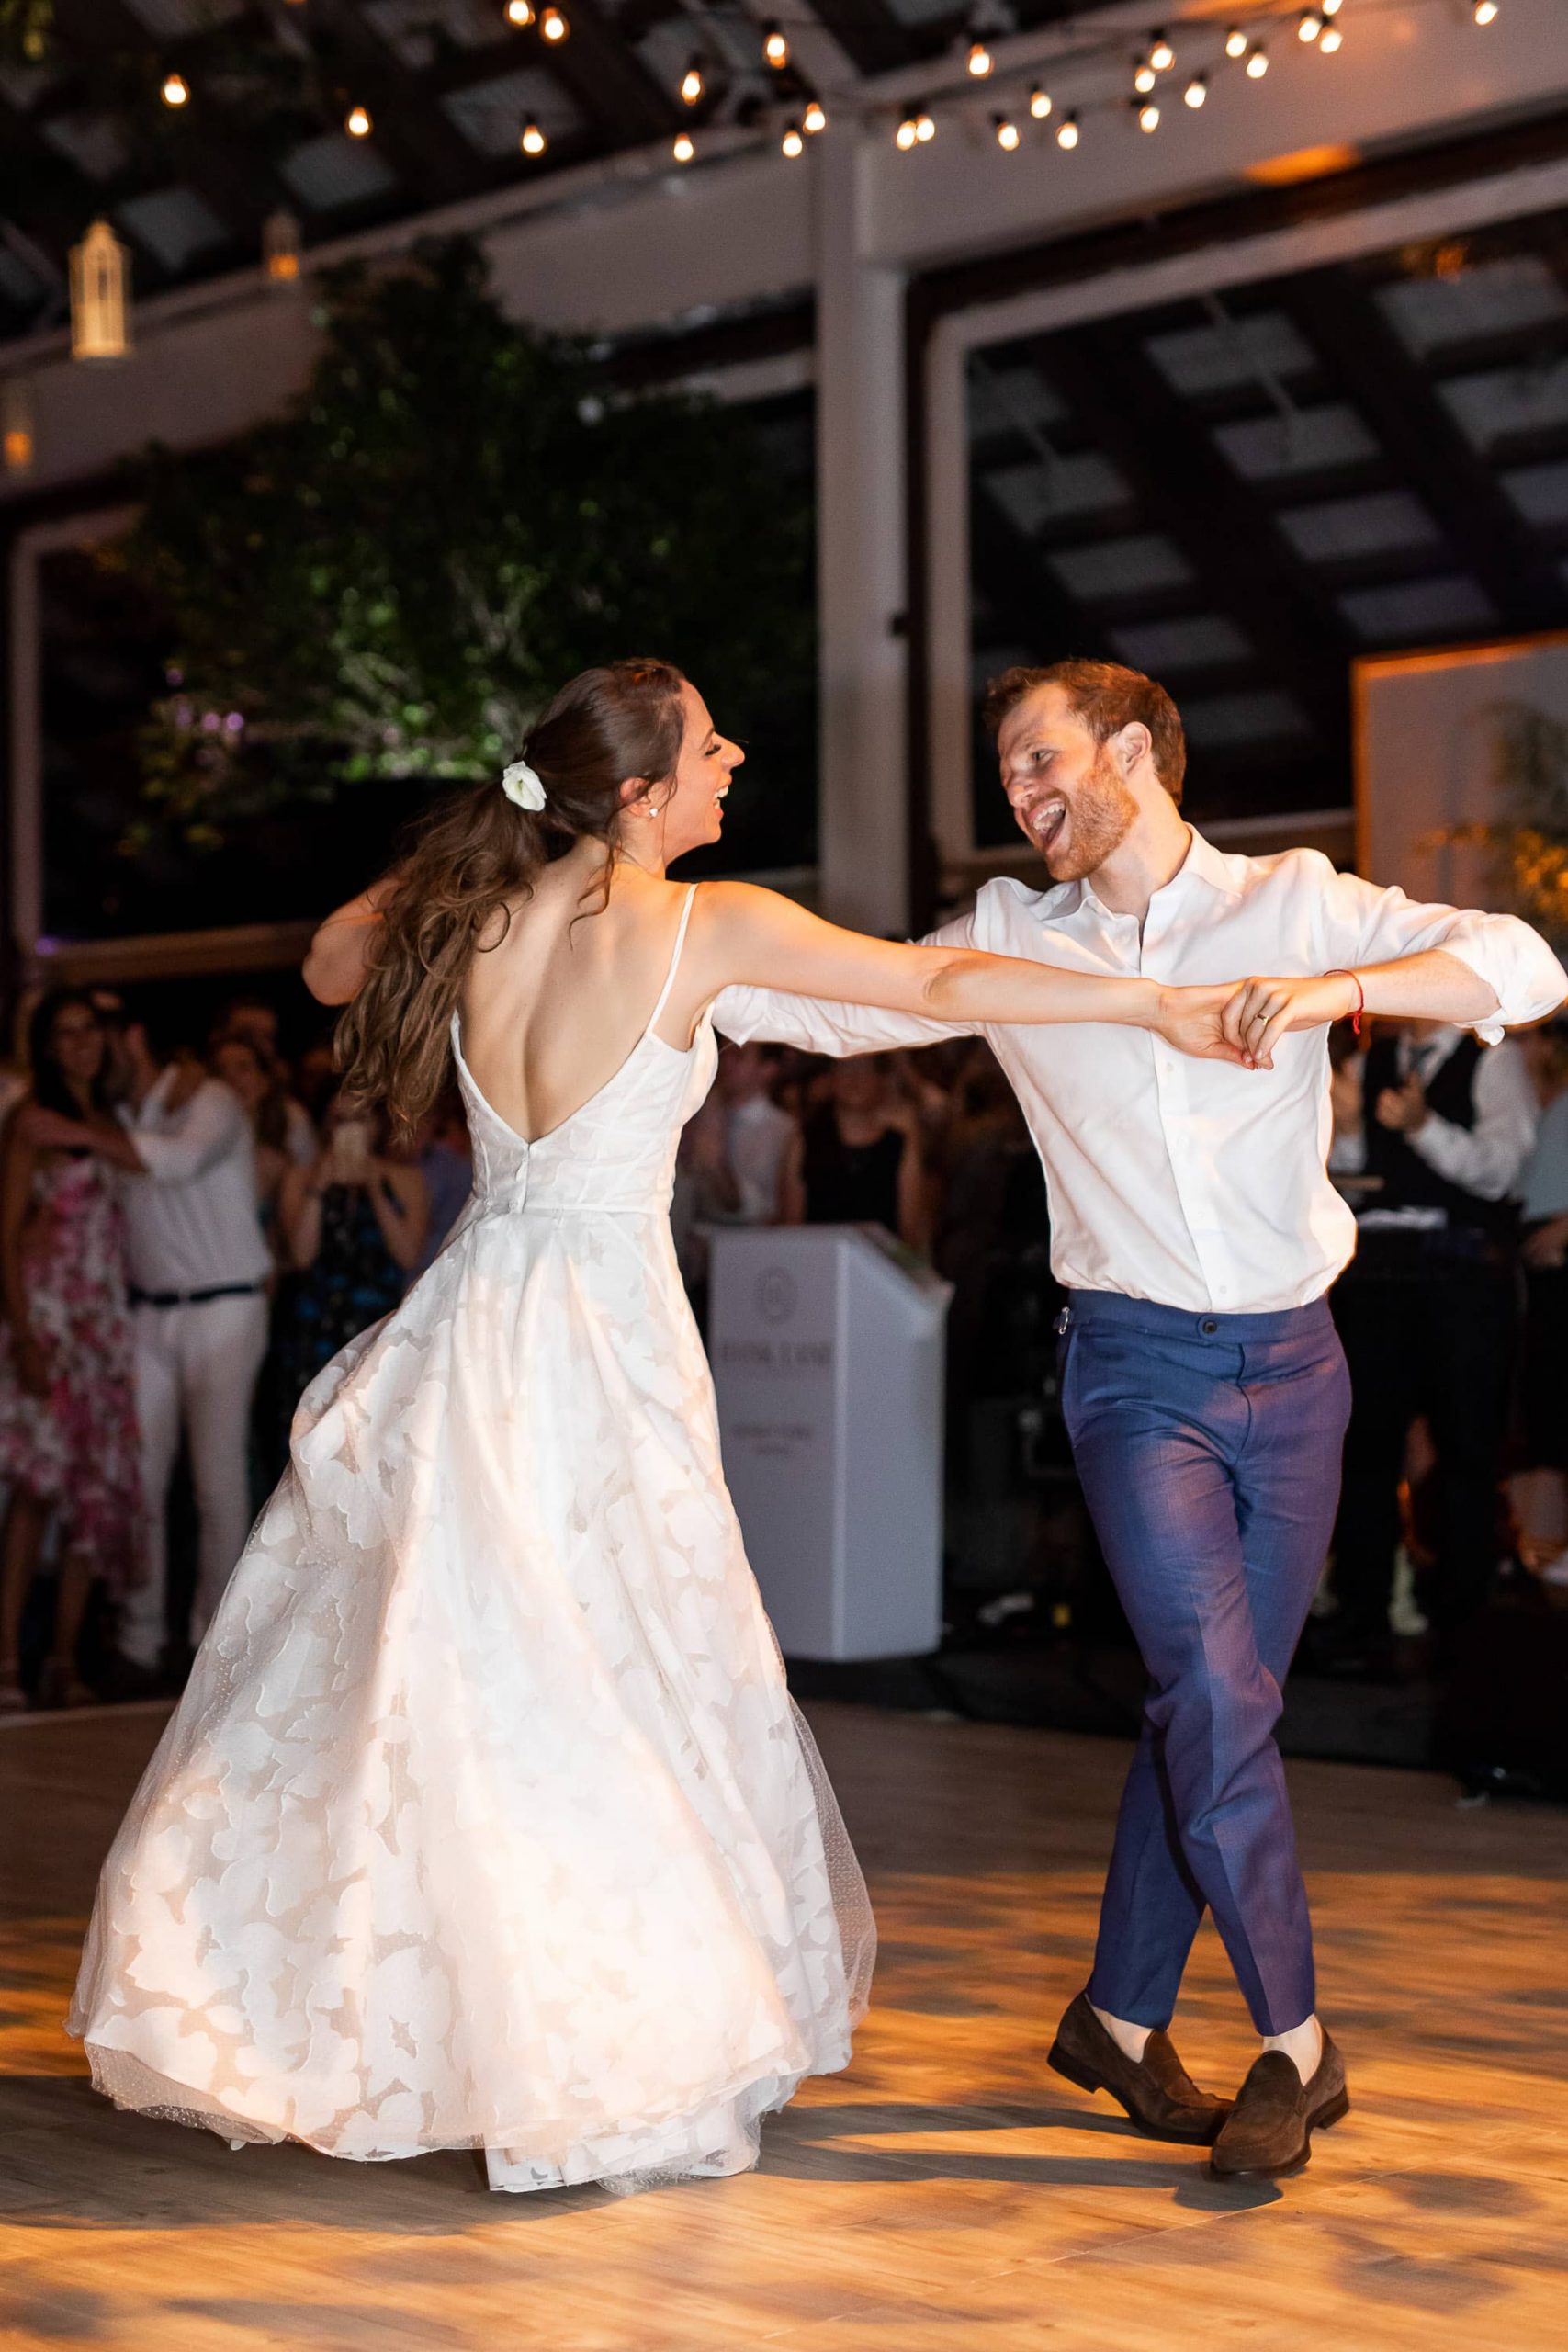 Bride and groom dancing during reception at this Hamptons wedding weekend held at The Parrish Museum | Photo by Roey Yohai Studio